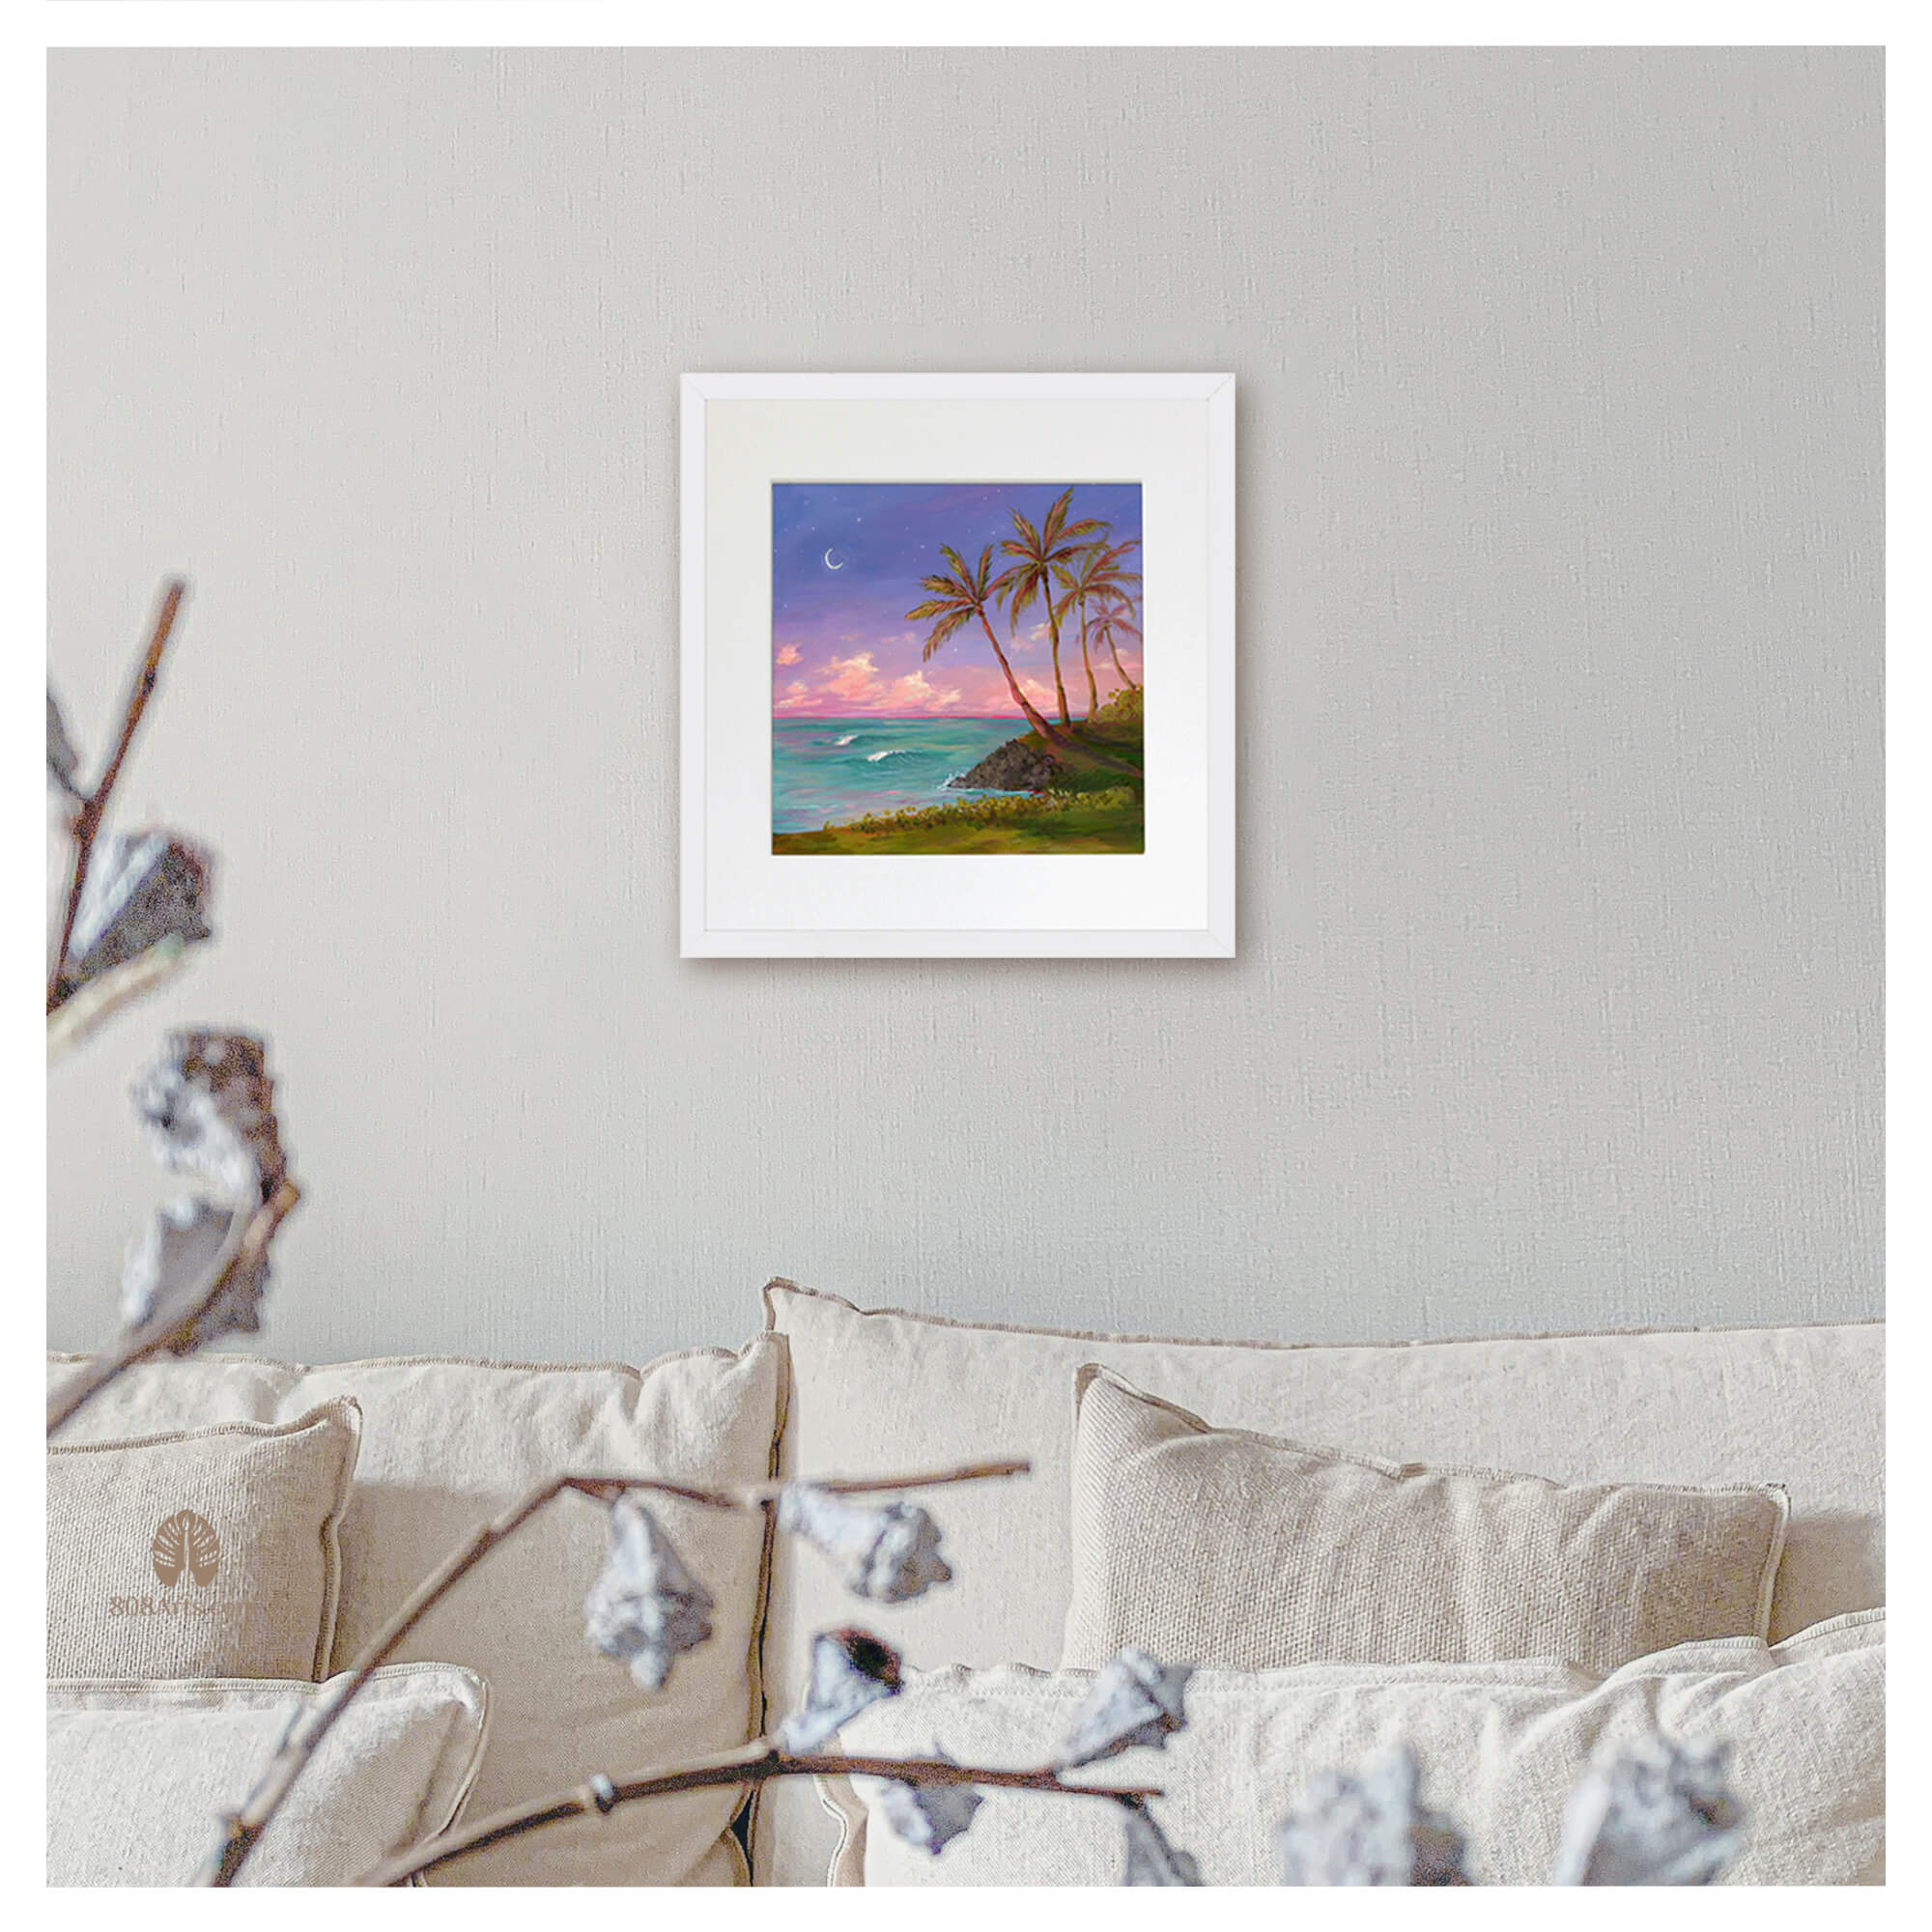 A cliff with coconut trees by Hawaii artist Lindsay Wilkins